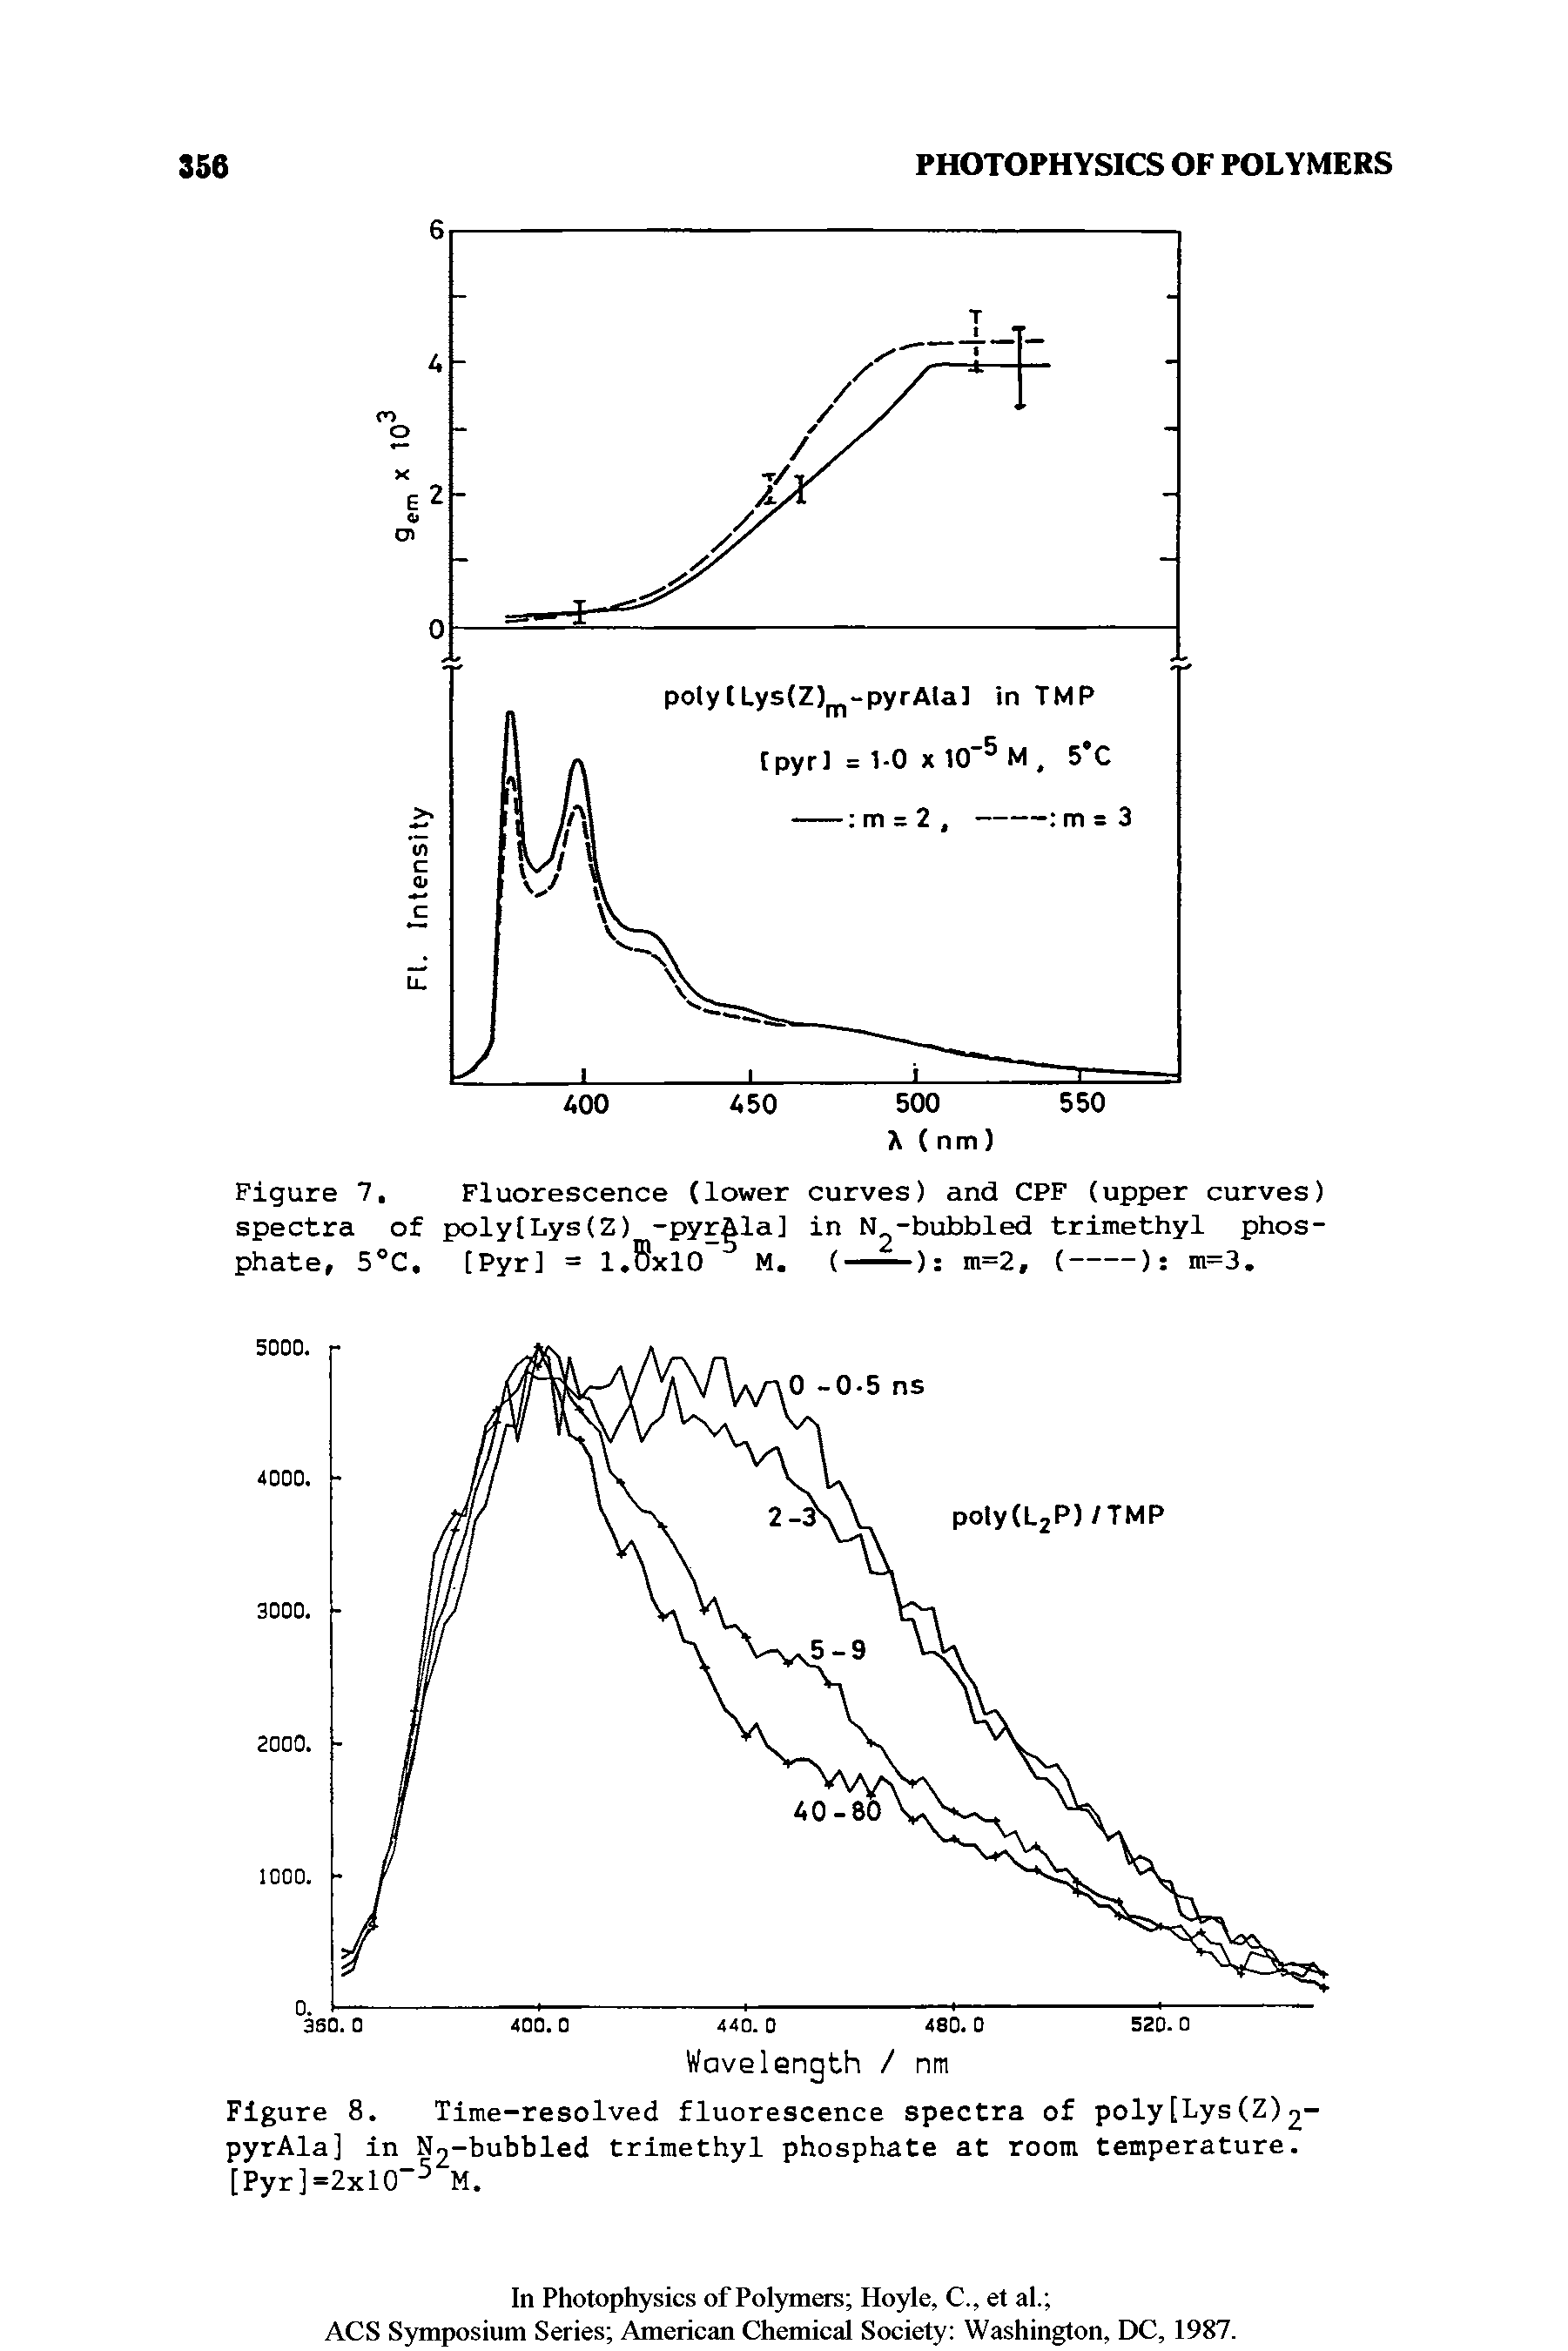 Figure 7. Fluorescence (lower curves) and CPF (upper curves) spectra of poly(Lys(Z) -pyrAla] in N -bubbled trimethyl phosphate, 5°C, [Pyr] = 1,8x10 M. (---------) m=2, (----) m=3.